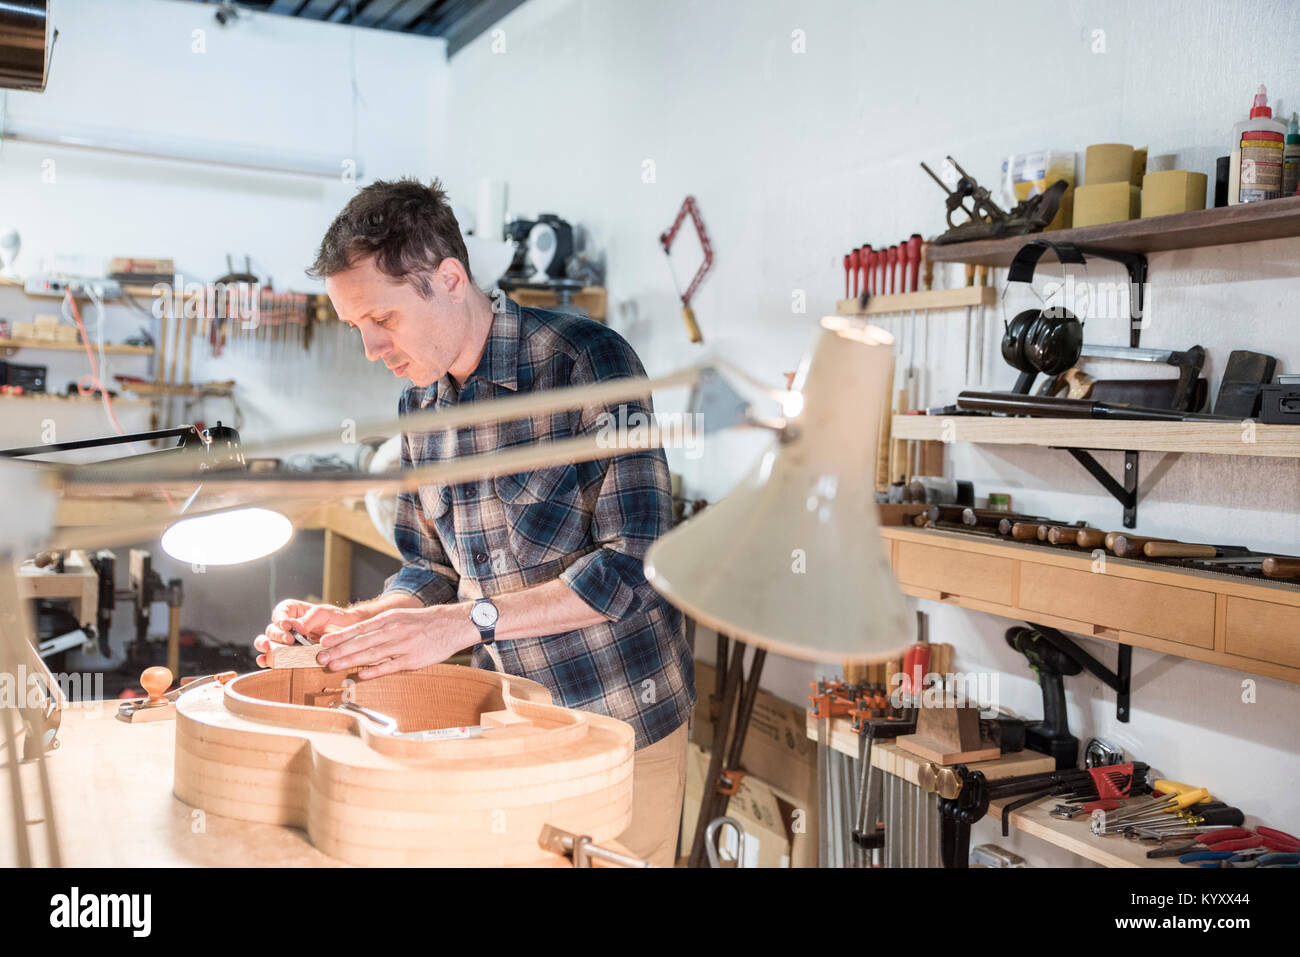 Worker making guitar while standing in workshop Stock Photo